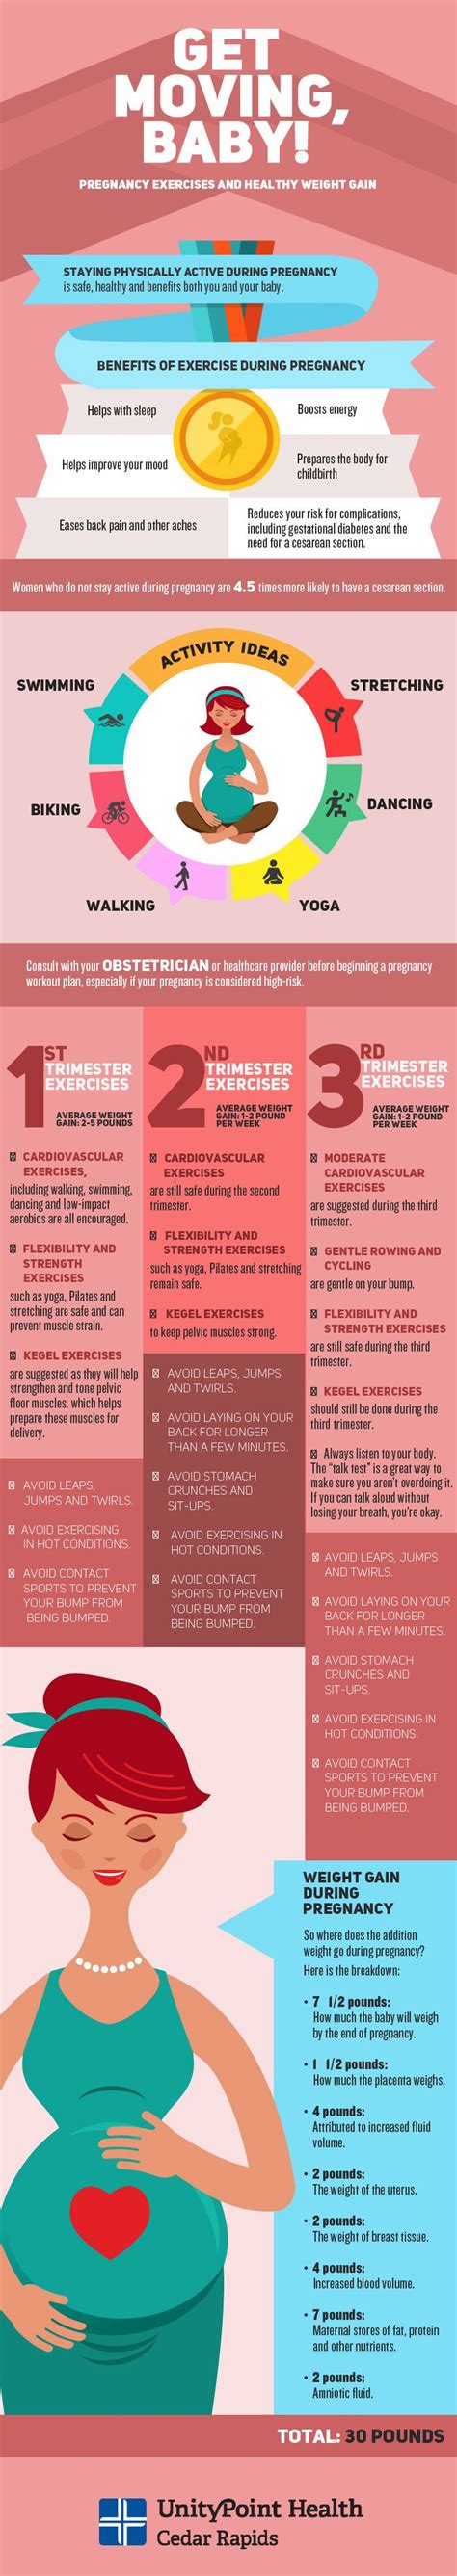 Recording your exercises and weights in a journal is a great way to track gains. pregnancy exercises by trimester and weight gain infographic | Holistic Pregnancy | Pinterest ...